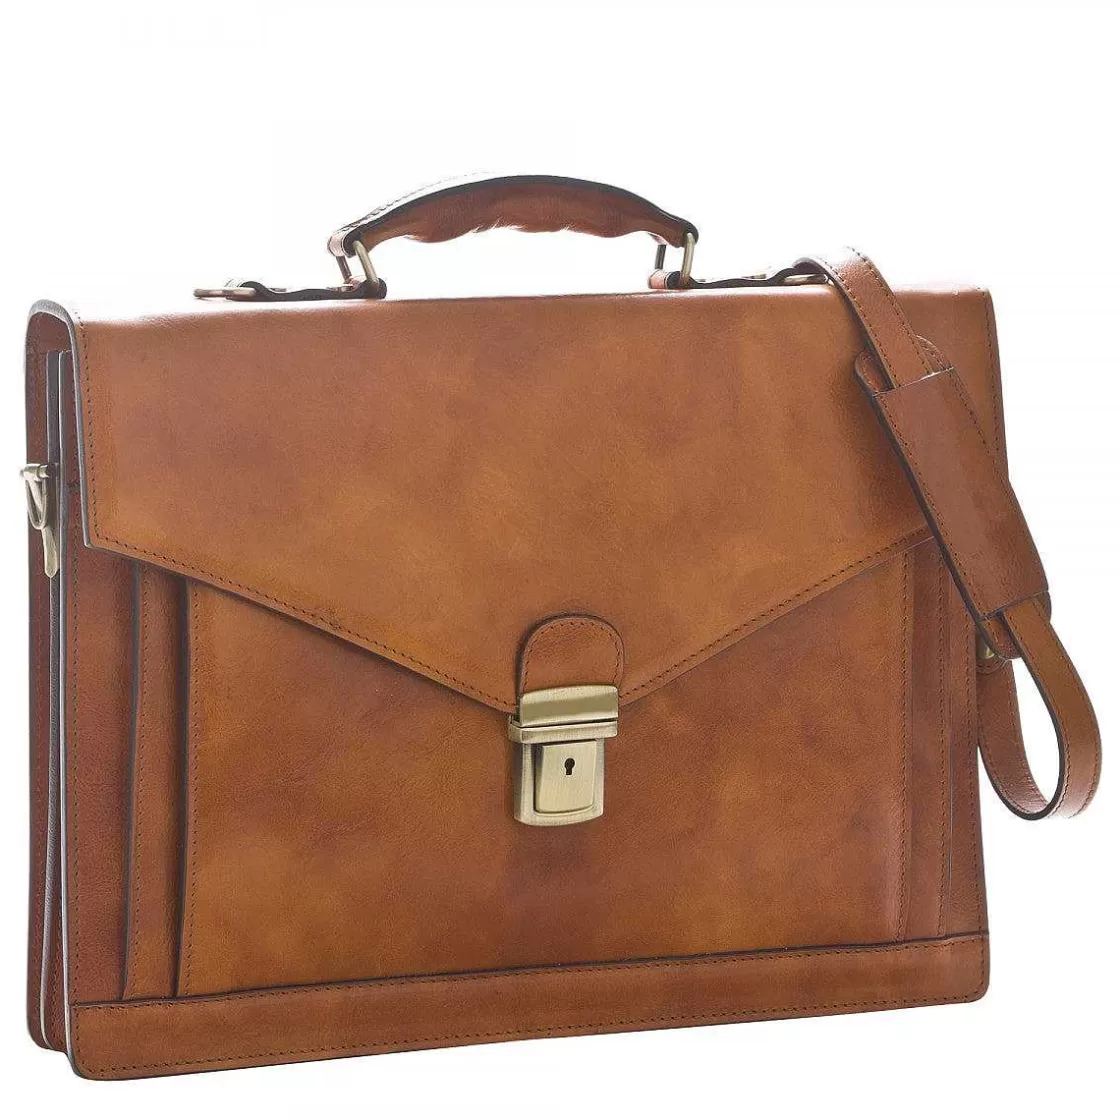 Leonardo Professional Briefcase In Full-Grain Leather With Three Compartments, Front Pocket And Rear Adjustable Shoulder Strap Outlet